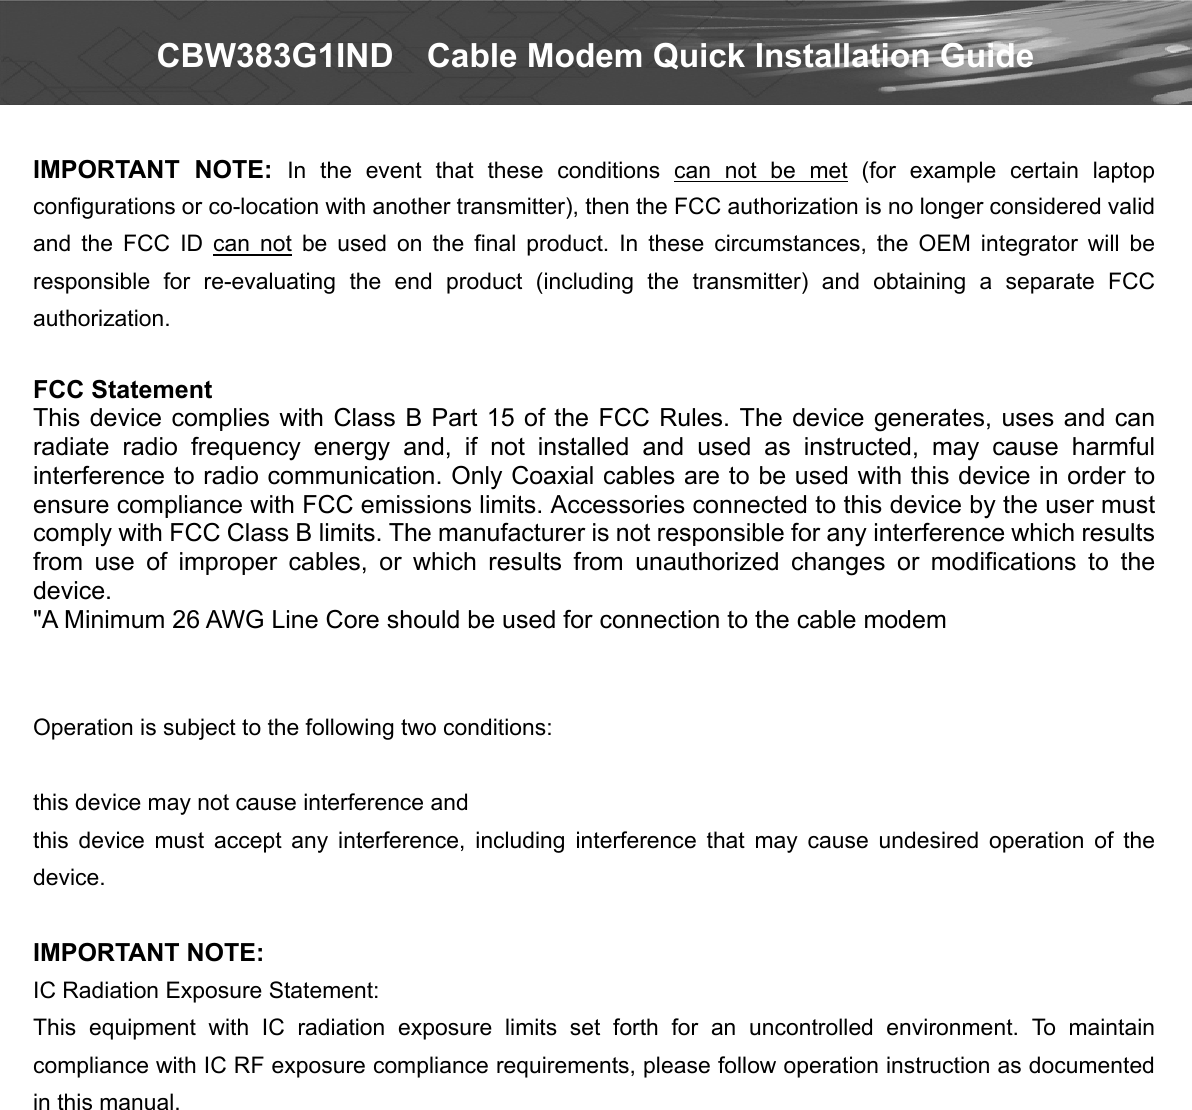  CBW383G1IND    Cable Modem Quick Installation Guide  IMPORTANT  NOTE:  In  the  event  that  these  conditions  can  not  be  met  (for  example  certain  laptop configurations or co-location with another transmitter), then the FCC authorization is no longer considered valid and  the  FCC  ID  can  not  be  used  on  the  final  product.  In  these  circumstances,  the  OEM  integrator  will  be responsible  for  re-evaluating  the  end  product  (including  the  transmitter)  and  obtaining  a  separate  FCC authorization.  FCC Statement   This device complies  with Class B Part  15 of the FCC Rules. The  device  generates, uses and  can radiate  radio  frequency  energy  and,  if  not  installed  and  used  as  instructed,  may  cause  harmful interference to radio communication. Only Coaxial cables are to be used with this device in order to ensure compliance with FCC emissions limits. Accessories connected to this device by the user must comply with FCC Class B limits. The manufacturer is not responsible for any interference which results from  use  of  improper  cables,  or  which  results  from  unauthorized  changes  or  modifications  to  the device. &quot;A Minimum 26 AWG Line Core should be used for connection to the cable modem Canada-Industry Canada (IC) Operation is subject to the following two conditions:    this device may not cause interference and   this  device  must  accept  any  interference,  including  interference  that  may  cause  undesired  operation  of  the device.  IMPORTANT NOTE: IC Radiation Exposure Statement: This  equipment  with  IC  radiation  exposure  limits  set  forth  for  an  uncontrolled  environment.  To  maintain compliance with IC RF exposure compliance requirements, please follow operation instruction as documented in this manual.   